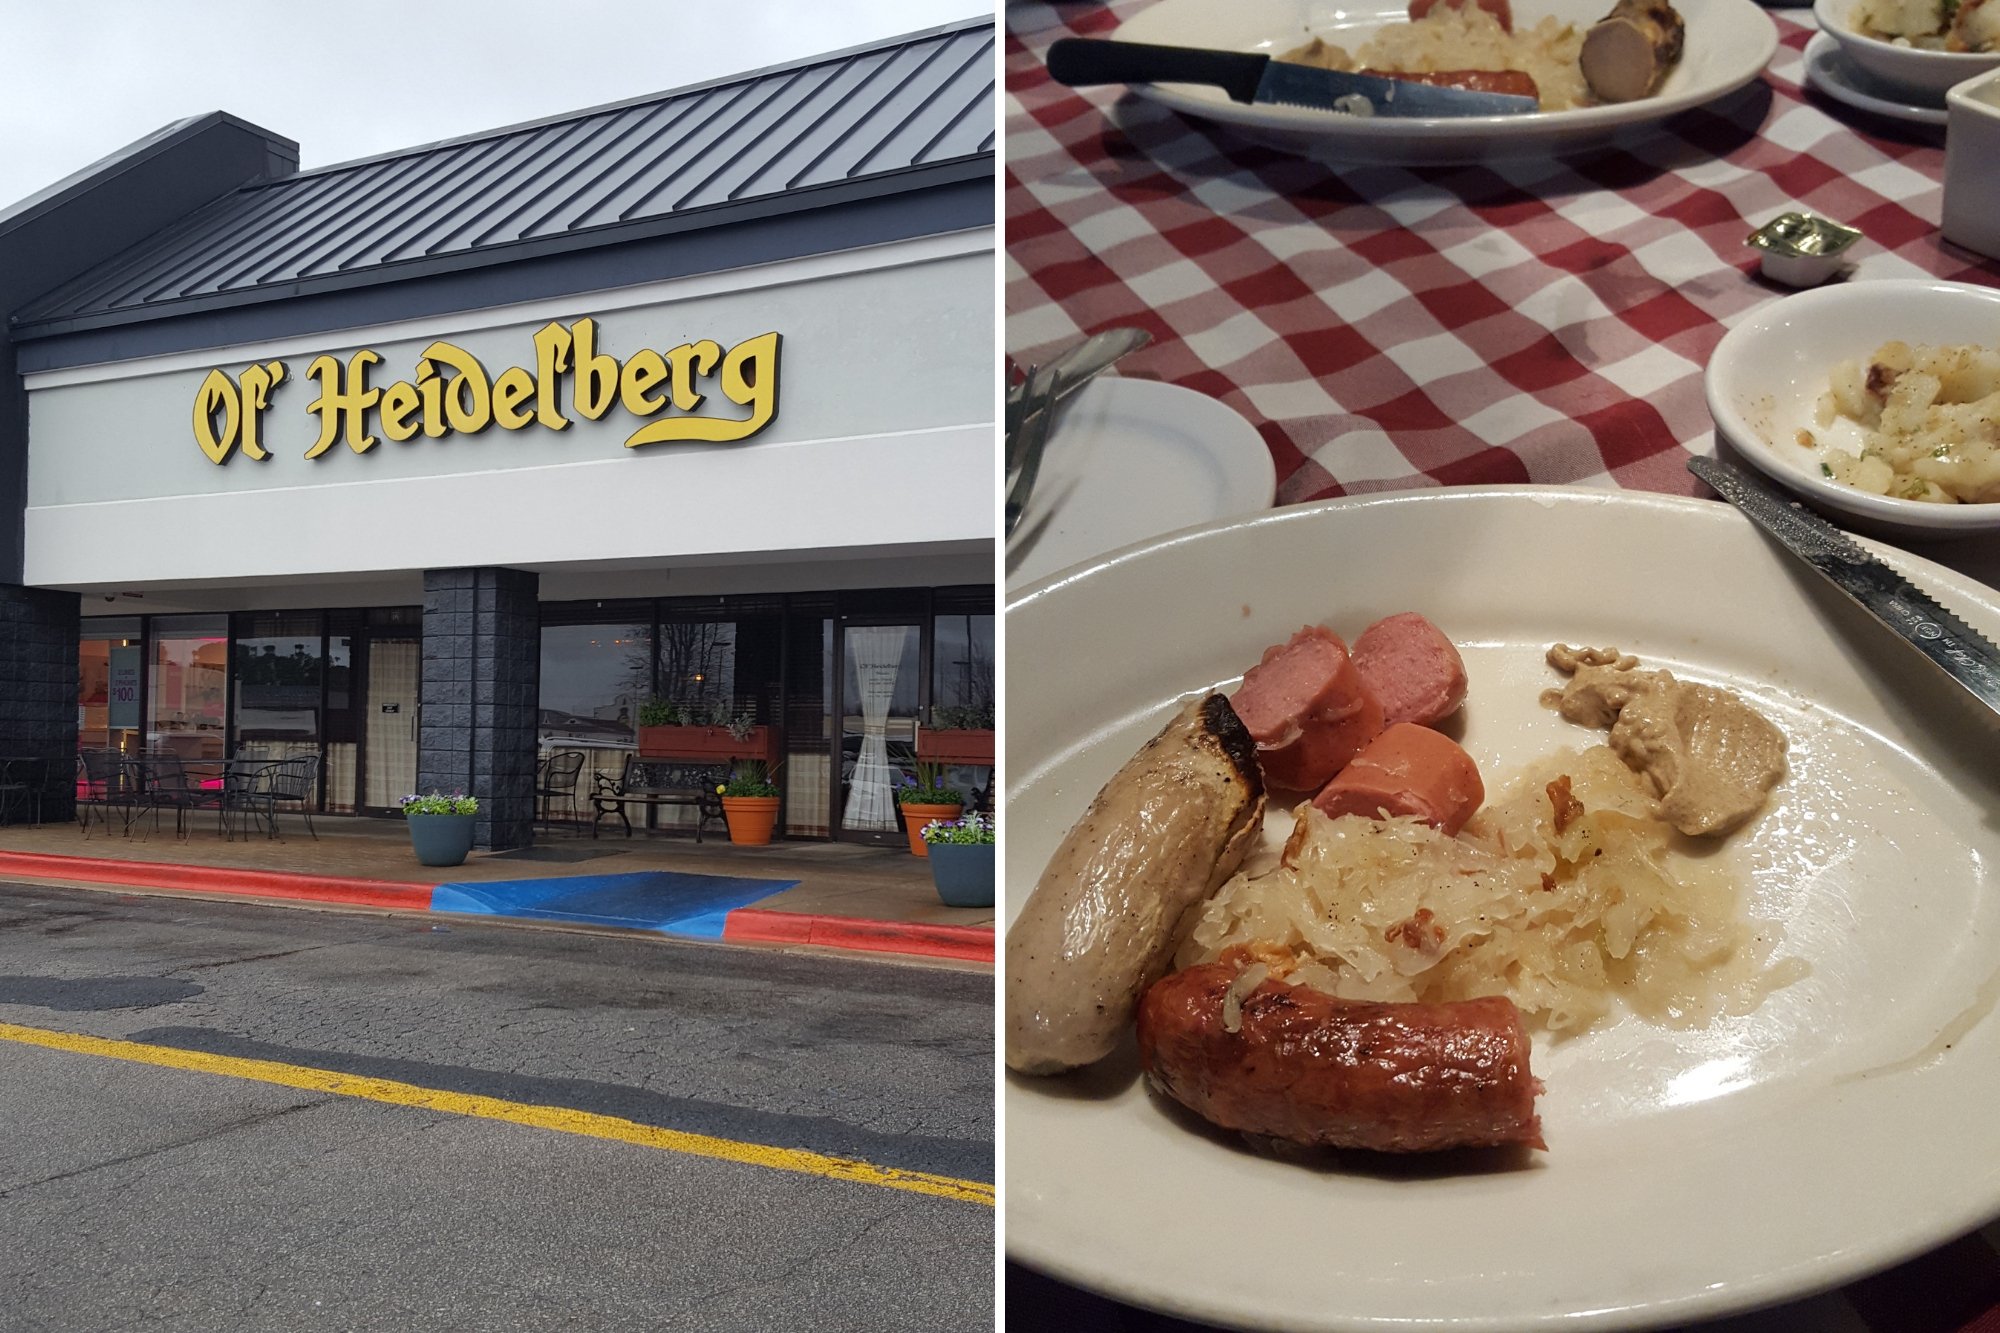 The exterior of a German restaurant and sausage plate in Huntsville